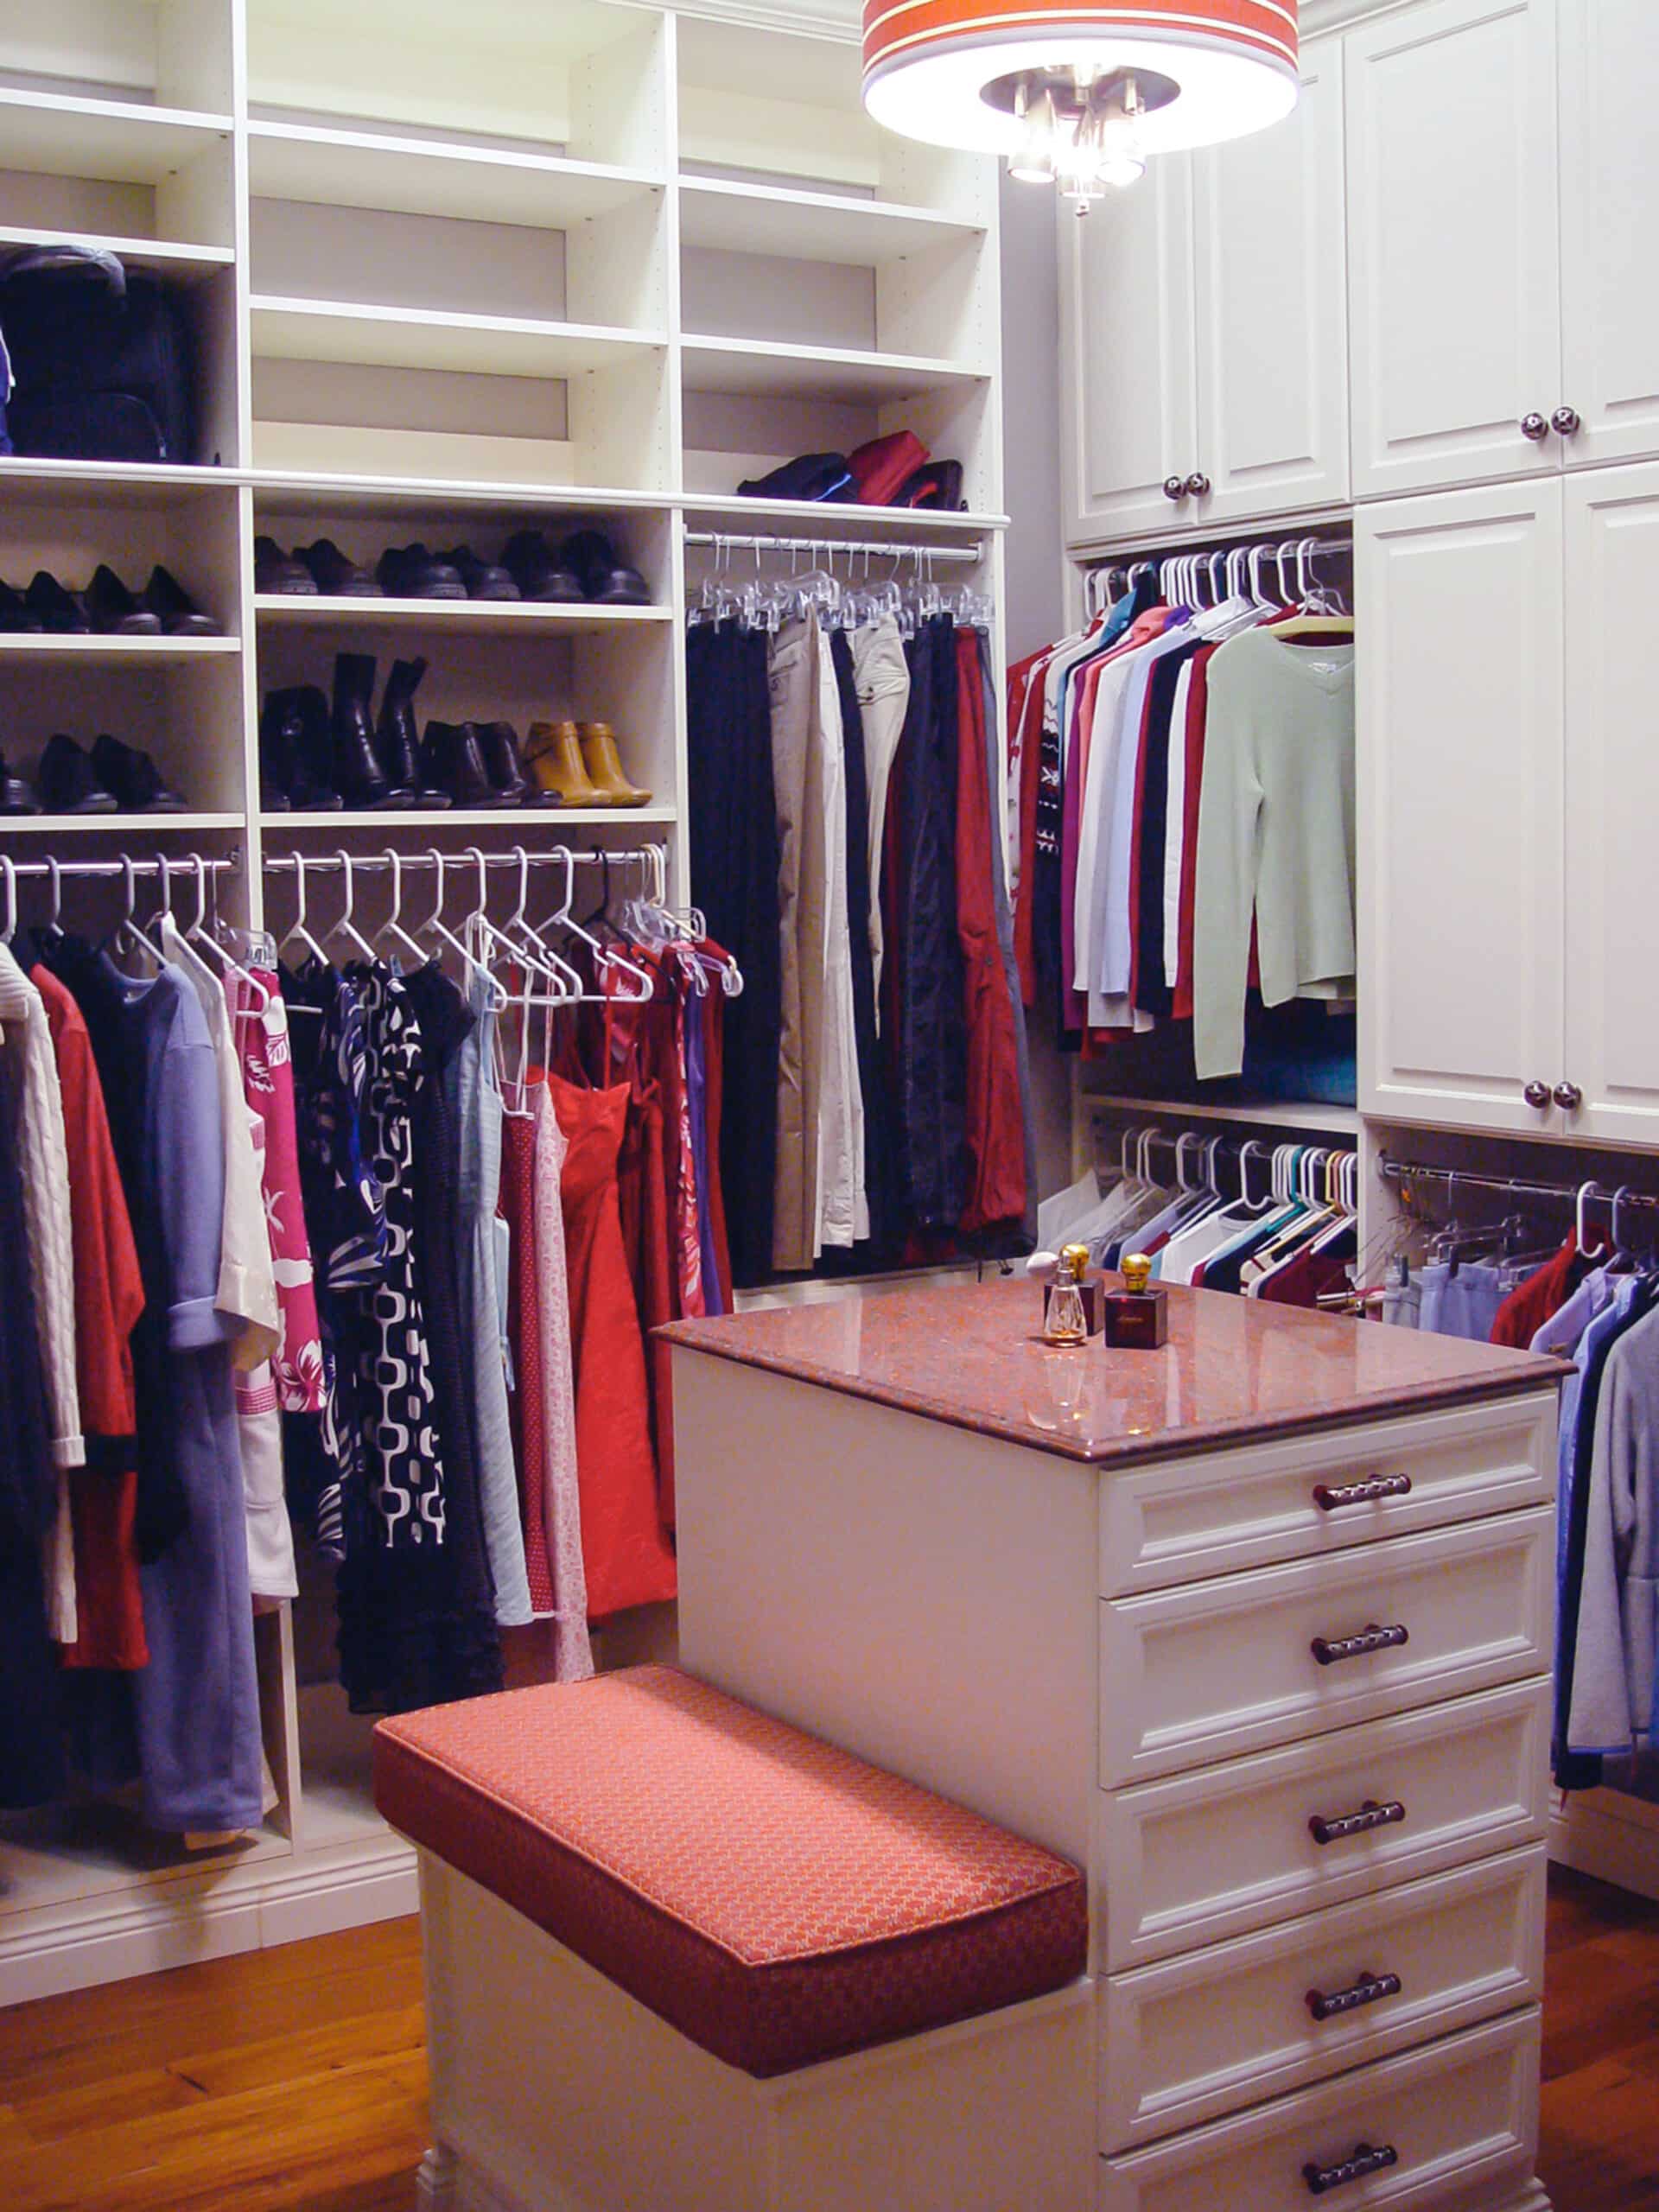 Custom closet with drawers, seating area, and organizers for clothing